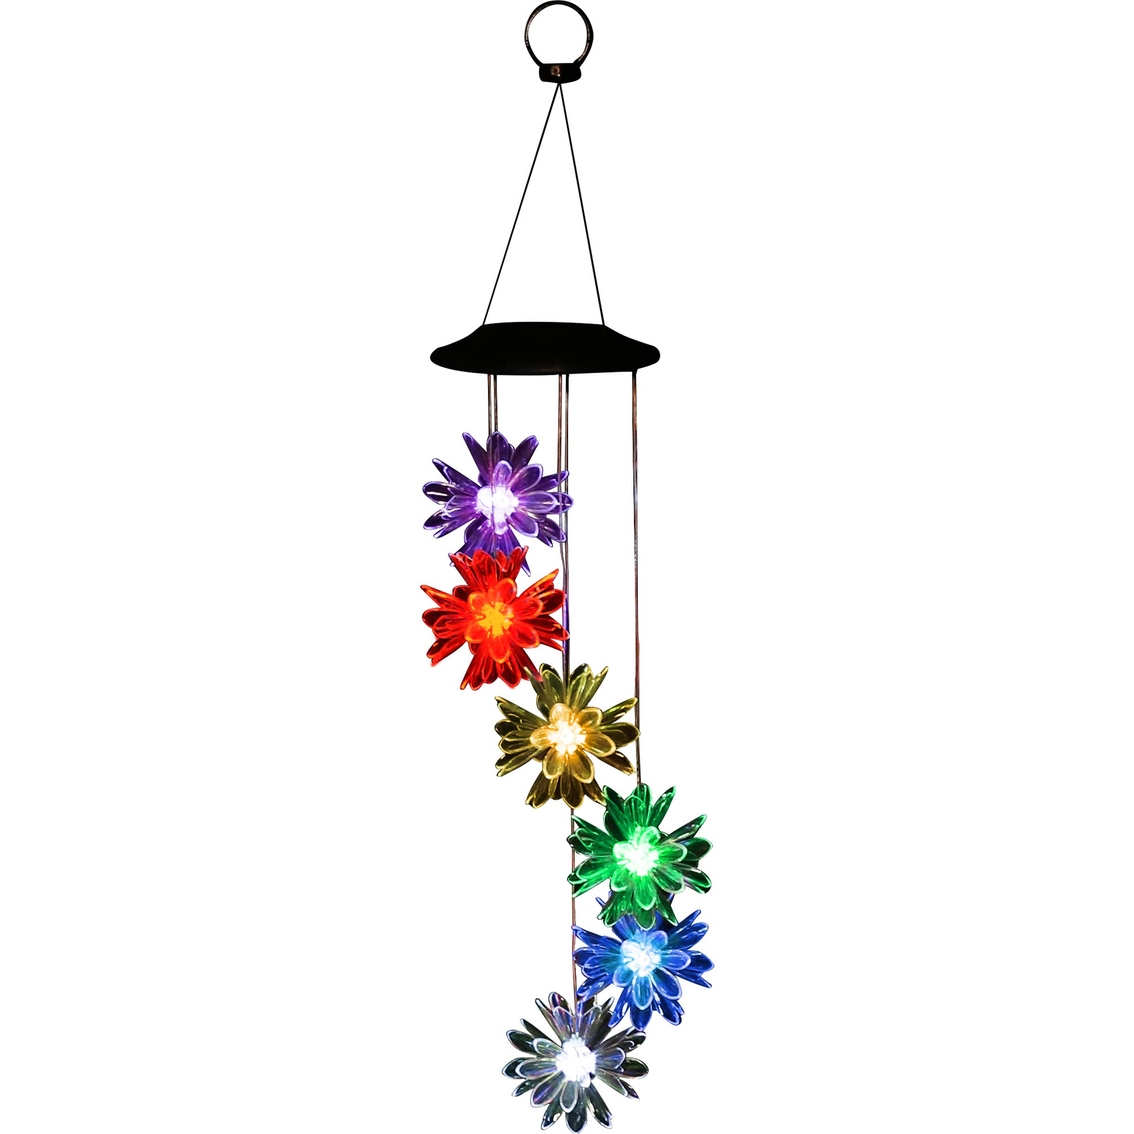 Alpine Solar Flower Wind Chime with LED Lights - Image 2 of 4